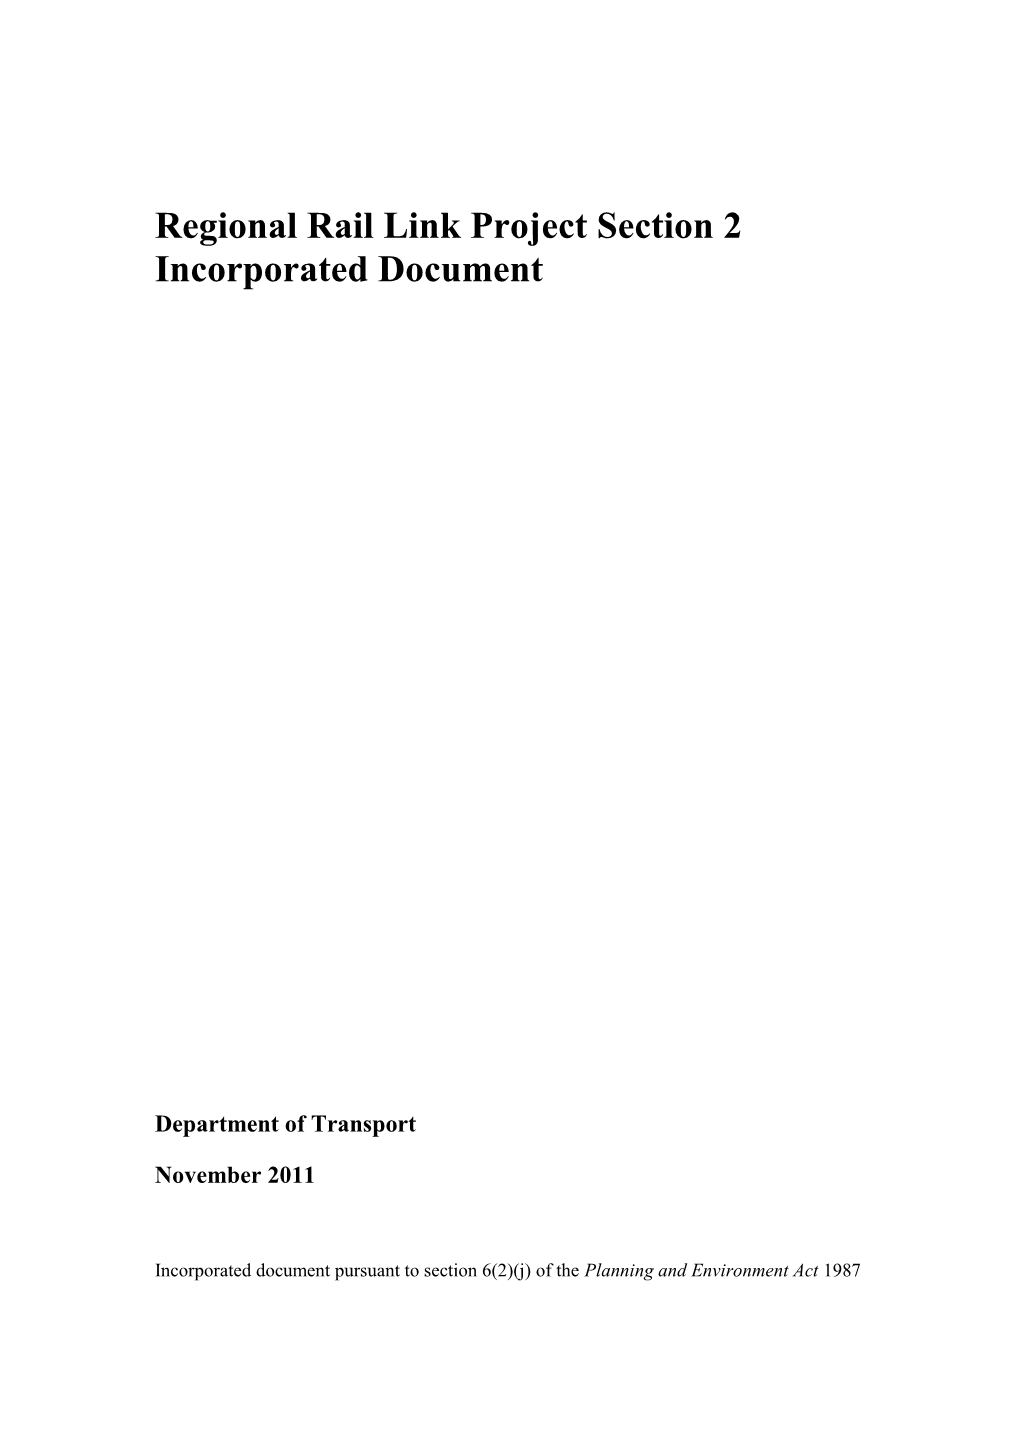 Regional Rail Link Project Section 2 Incorporated Document